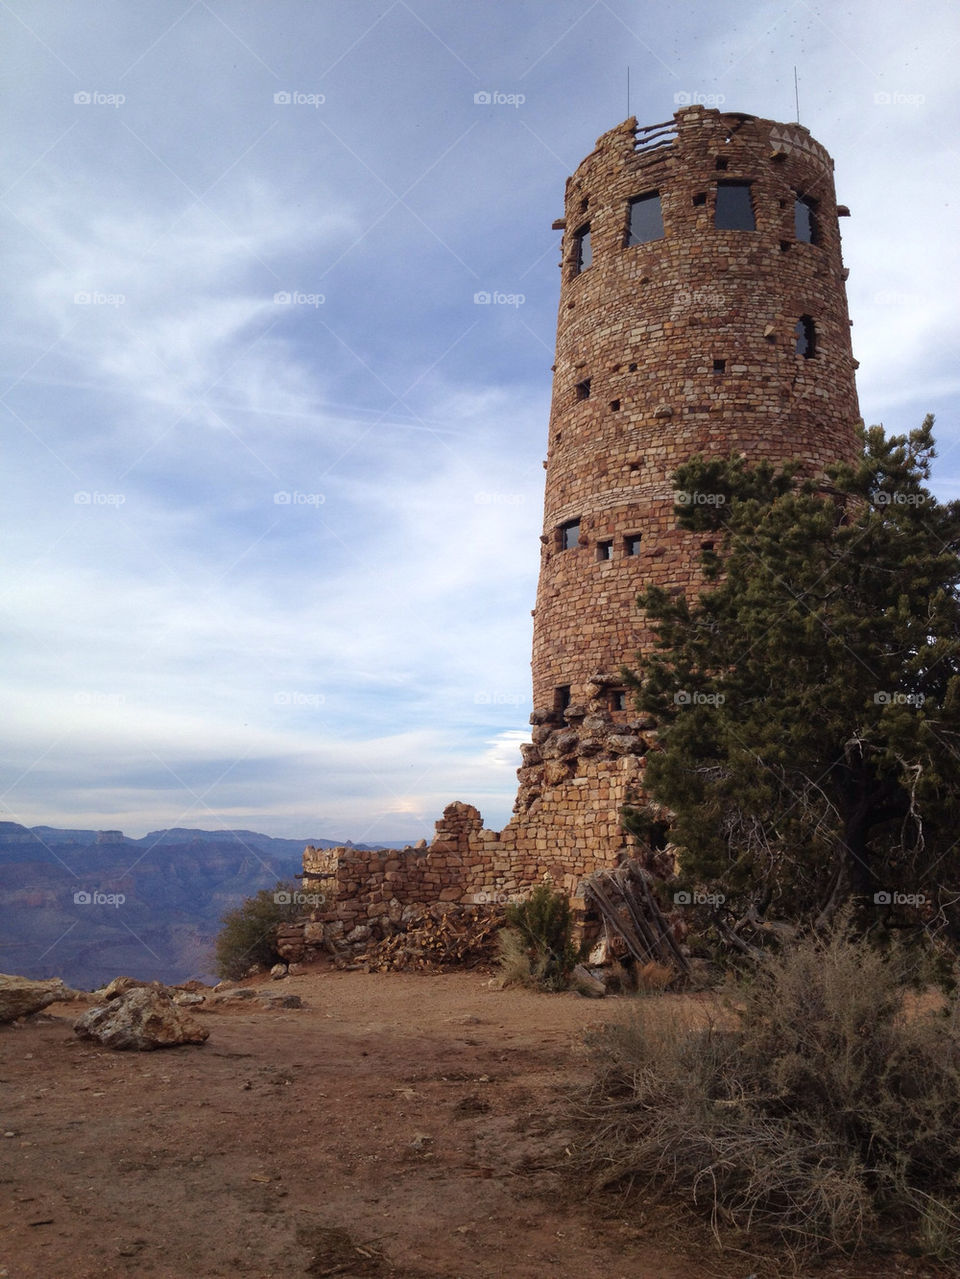 Swirling clouds over the Grand Canyon  Watch Tower.